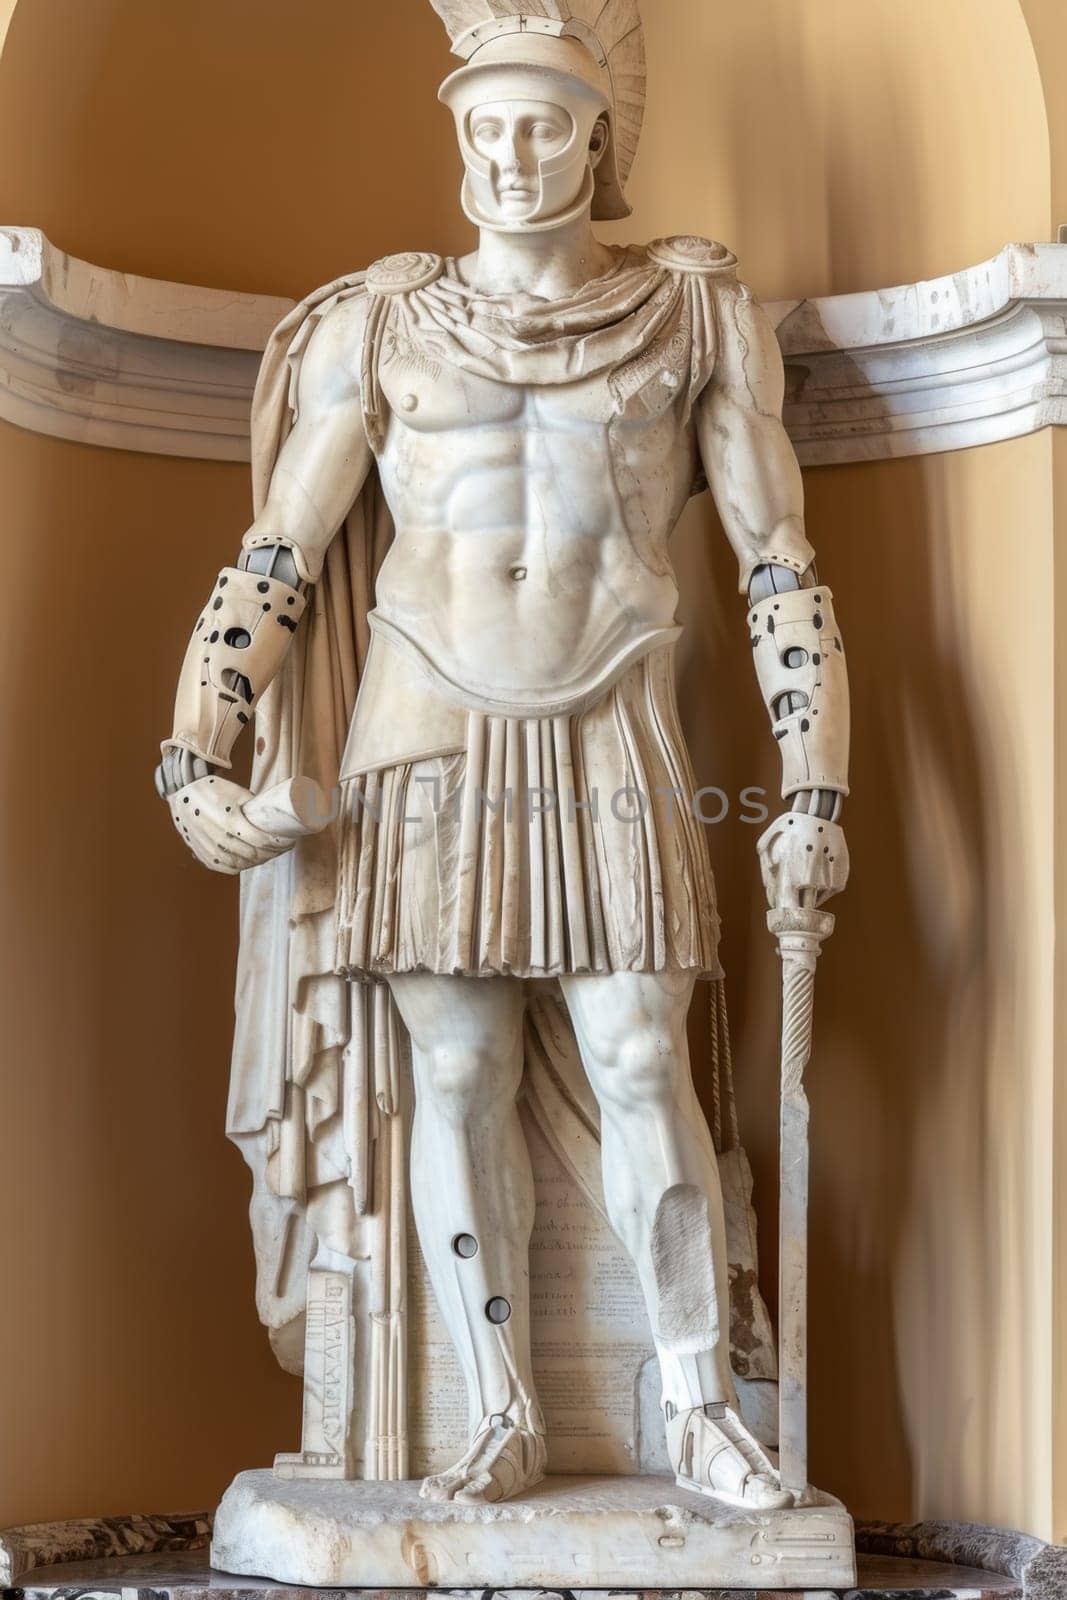 a fictional statue of a roman soldier with robotic arms holding an axe and shield